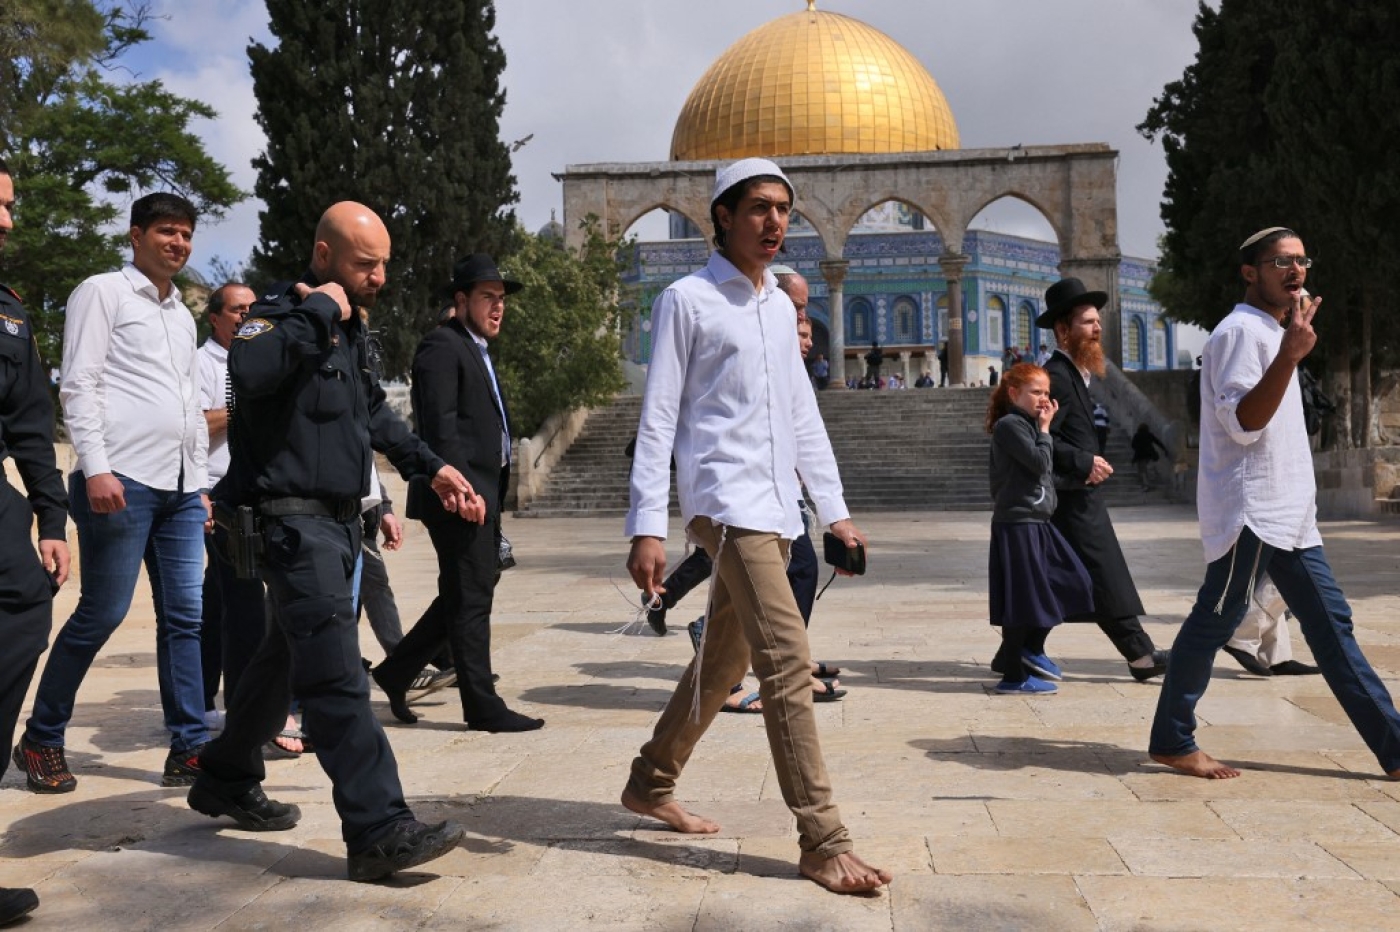 Israeli police accompany a group of Israeli far-right activists during a storming of al-Aqsa Mosque in the Old City of Jerusalem on 5 May 2022. (AFP)